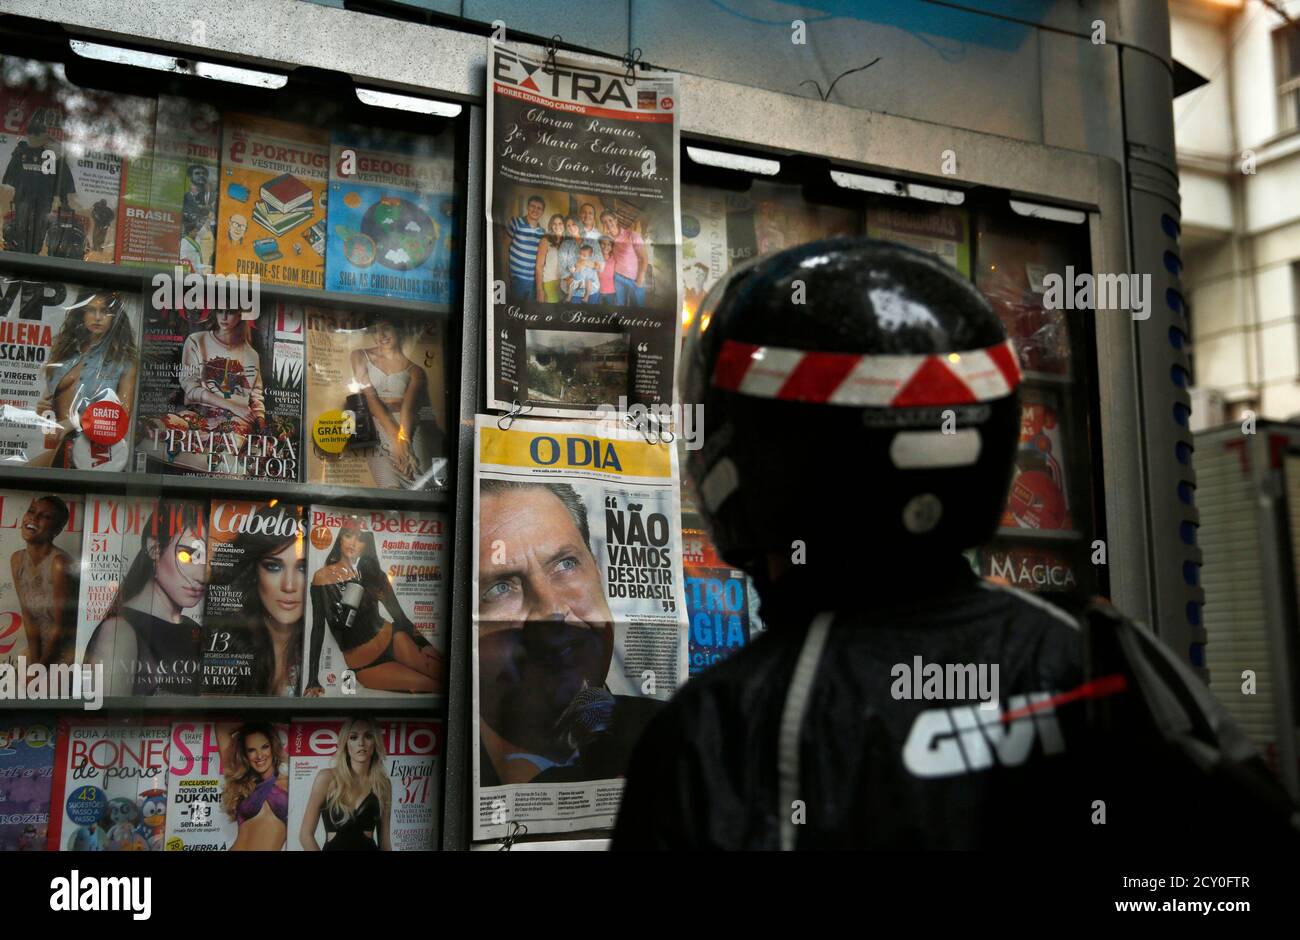 A man reads newspapers announcing the death of the late presidential candidate Eduardo Campos, in Rio de Janeiro August 14, 2014. Brazilian environmentalist Marina Silva is still in shock from the death of Campos and has not begun to consider whether she will run in his place, a close friend said on Thursday. That closely watched decision could upend the Oct. 5 presidential race and threaten President Dilma Rousseff's re-election bid, given Silva's appeal to disaffected voters tired of the country's traditional parties. REUTERS/Pilar Olivares (REUTERS - Tags: POLITICS ELECTIONS) Stock Photo